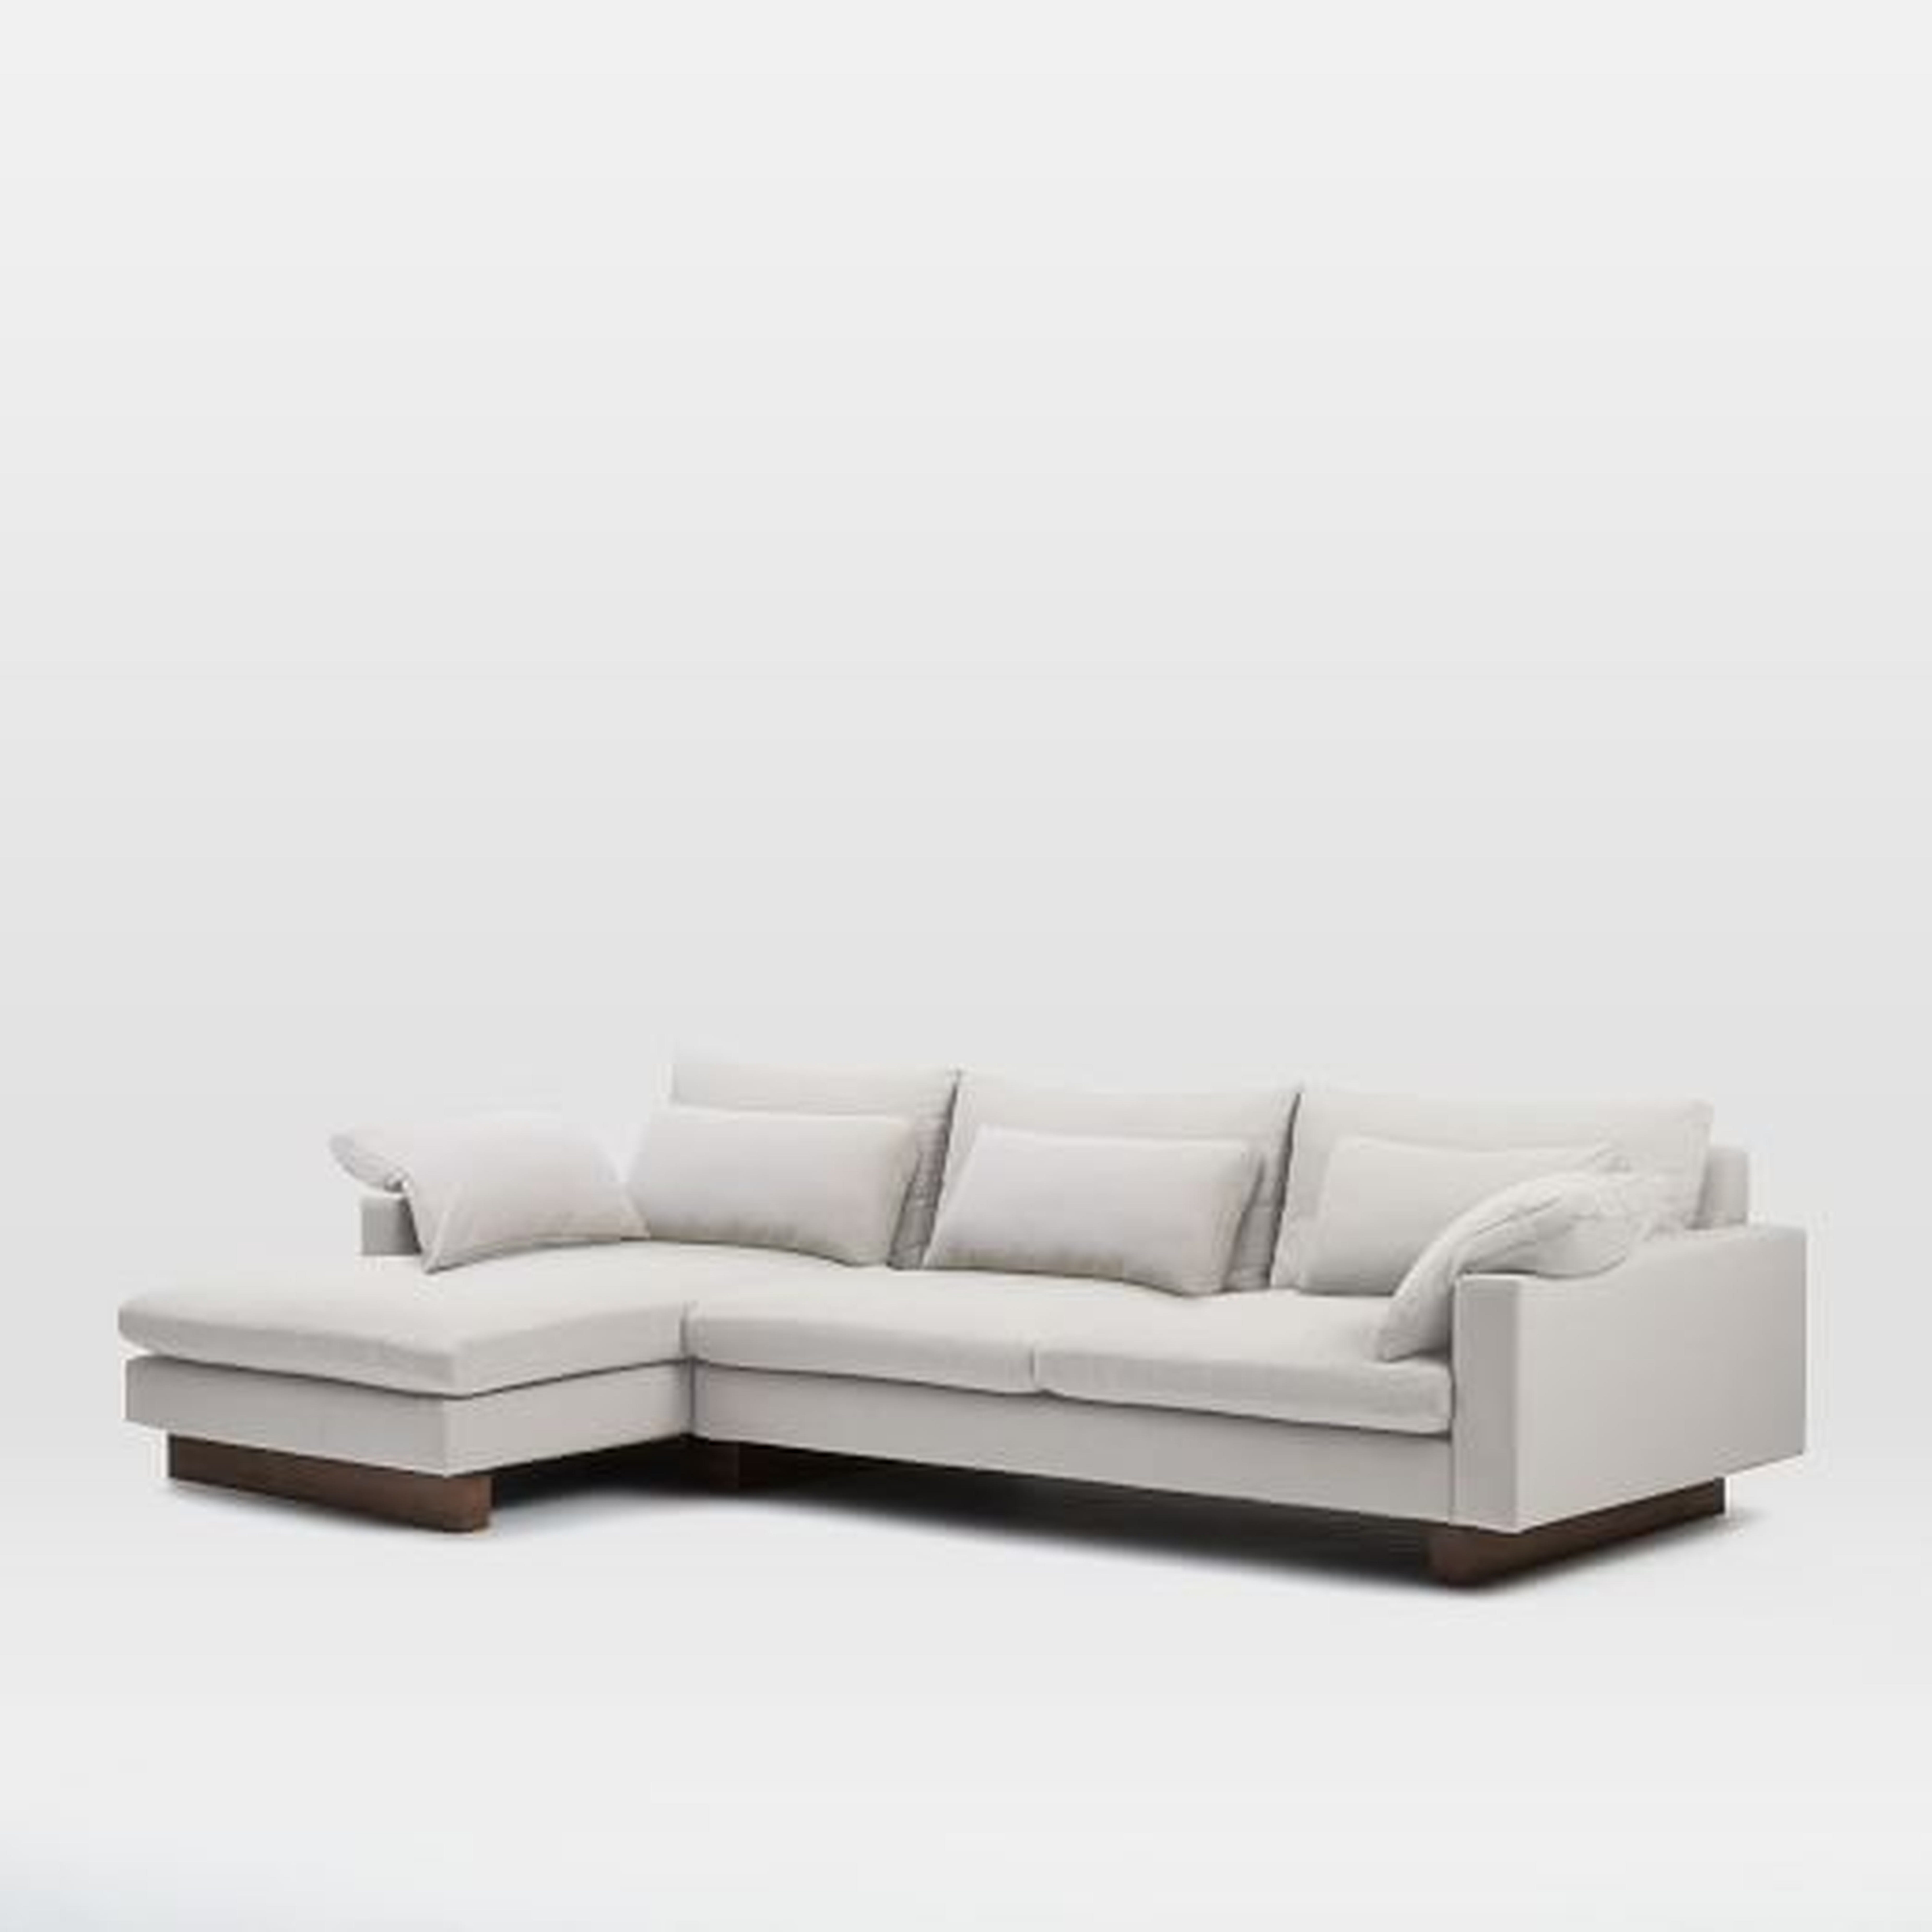 Harmony 2-Piece Chaise Sectional -Left Chaise 2-Piece Sectional - West Elm